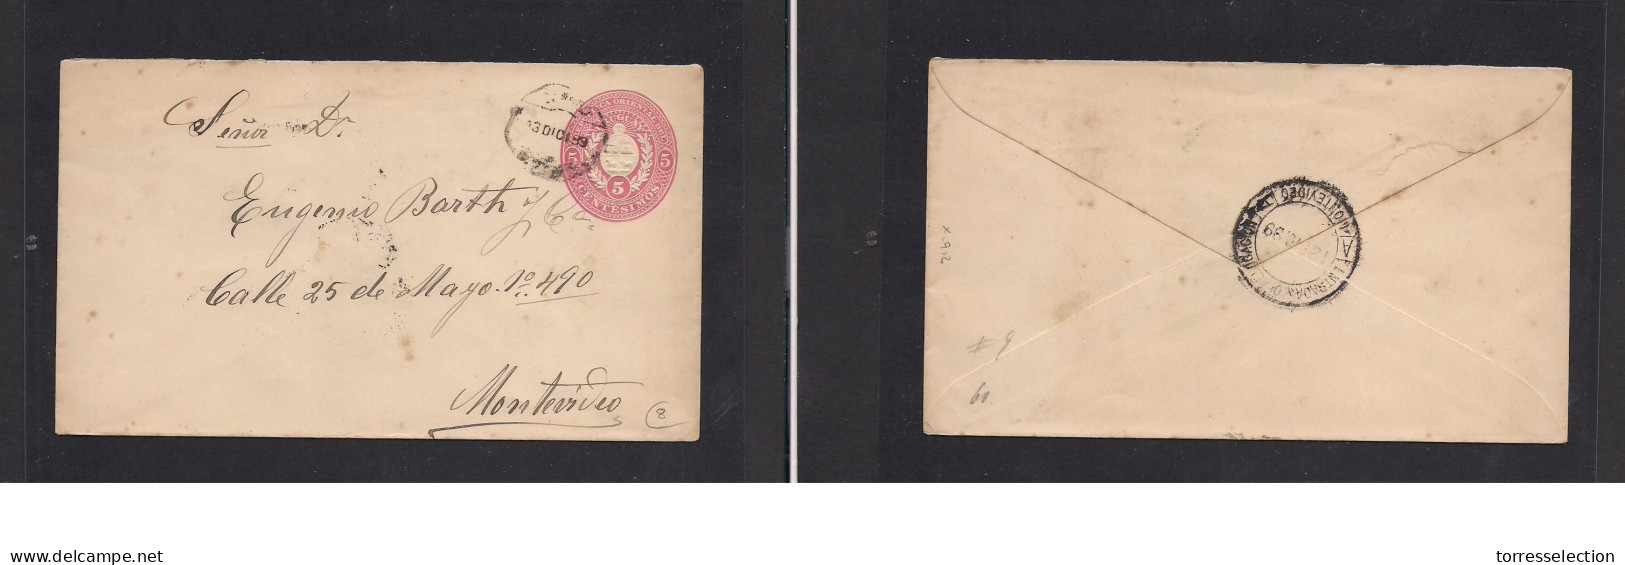 URUGUAY. Uruguay - Cover - 1899 Salto To Mont Early Stat Env, Fine Used. Easy Deal. - Uruguay